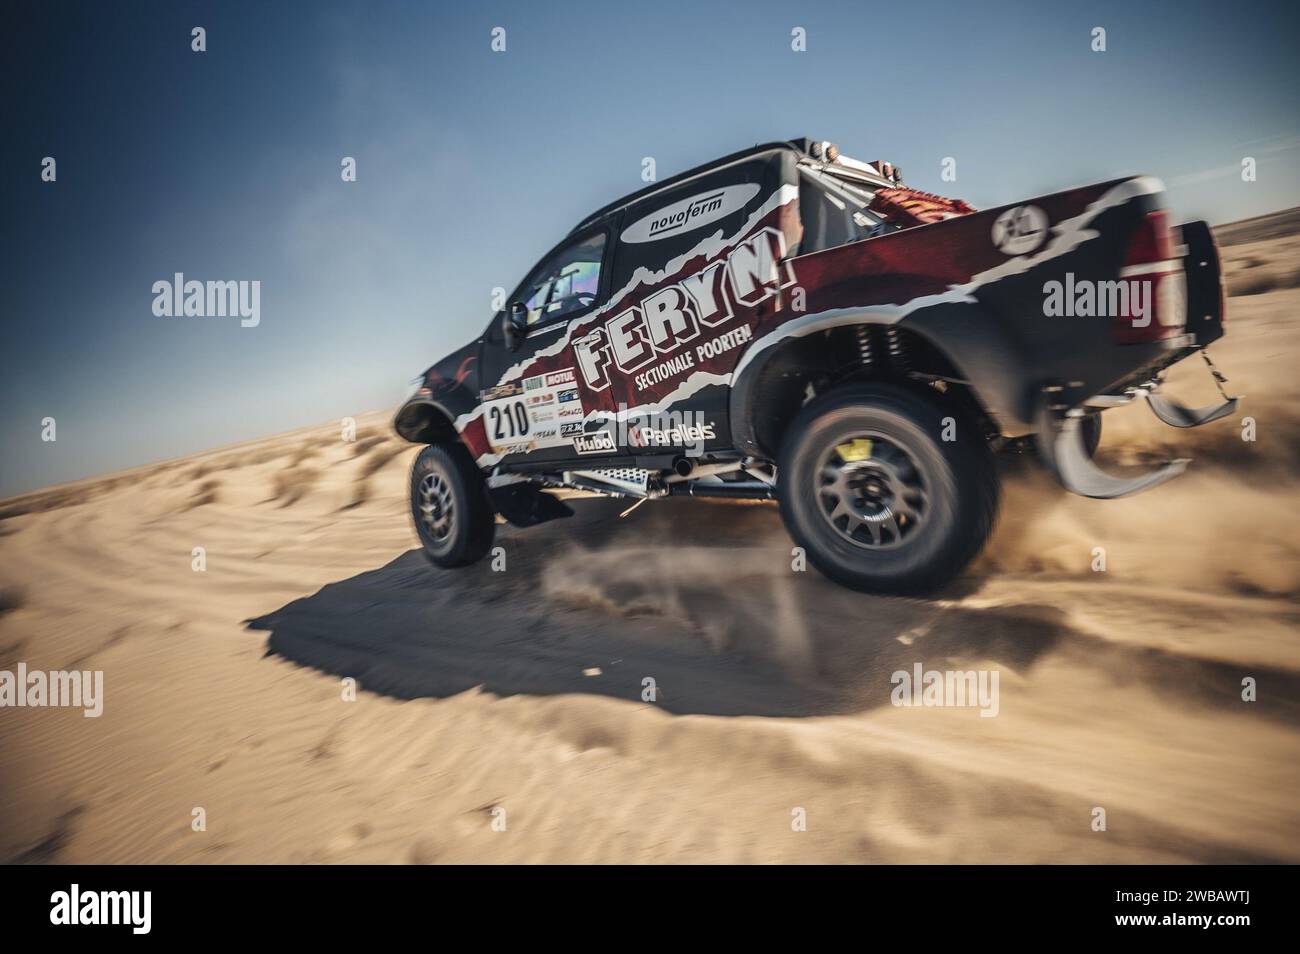 Chami, Mauritania. 08th Jan, 2024. ATTENTION EDITORS - HAND OUT PICTURES - EDITORIAL USE ONLY - MANDATORY CREDIT: 'ALESSIO CORRADINI ' Hand out pictures released by ALESSIO CORRADINI shows Pascal Feryn and Kurt Keysers and their car at the 2024 Africa Eco Race in Chami, Mauritania, on Monday 08 January 2024. *** Belga and Belga Editorial Board decline all responsibility regarding the content of this picture. *** PHOTO HAND OUT ALESSIO CORRADINI Credit: Belga News Agency/Alamy Live News Stock Photo